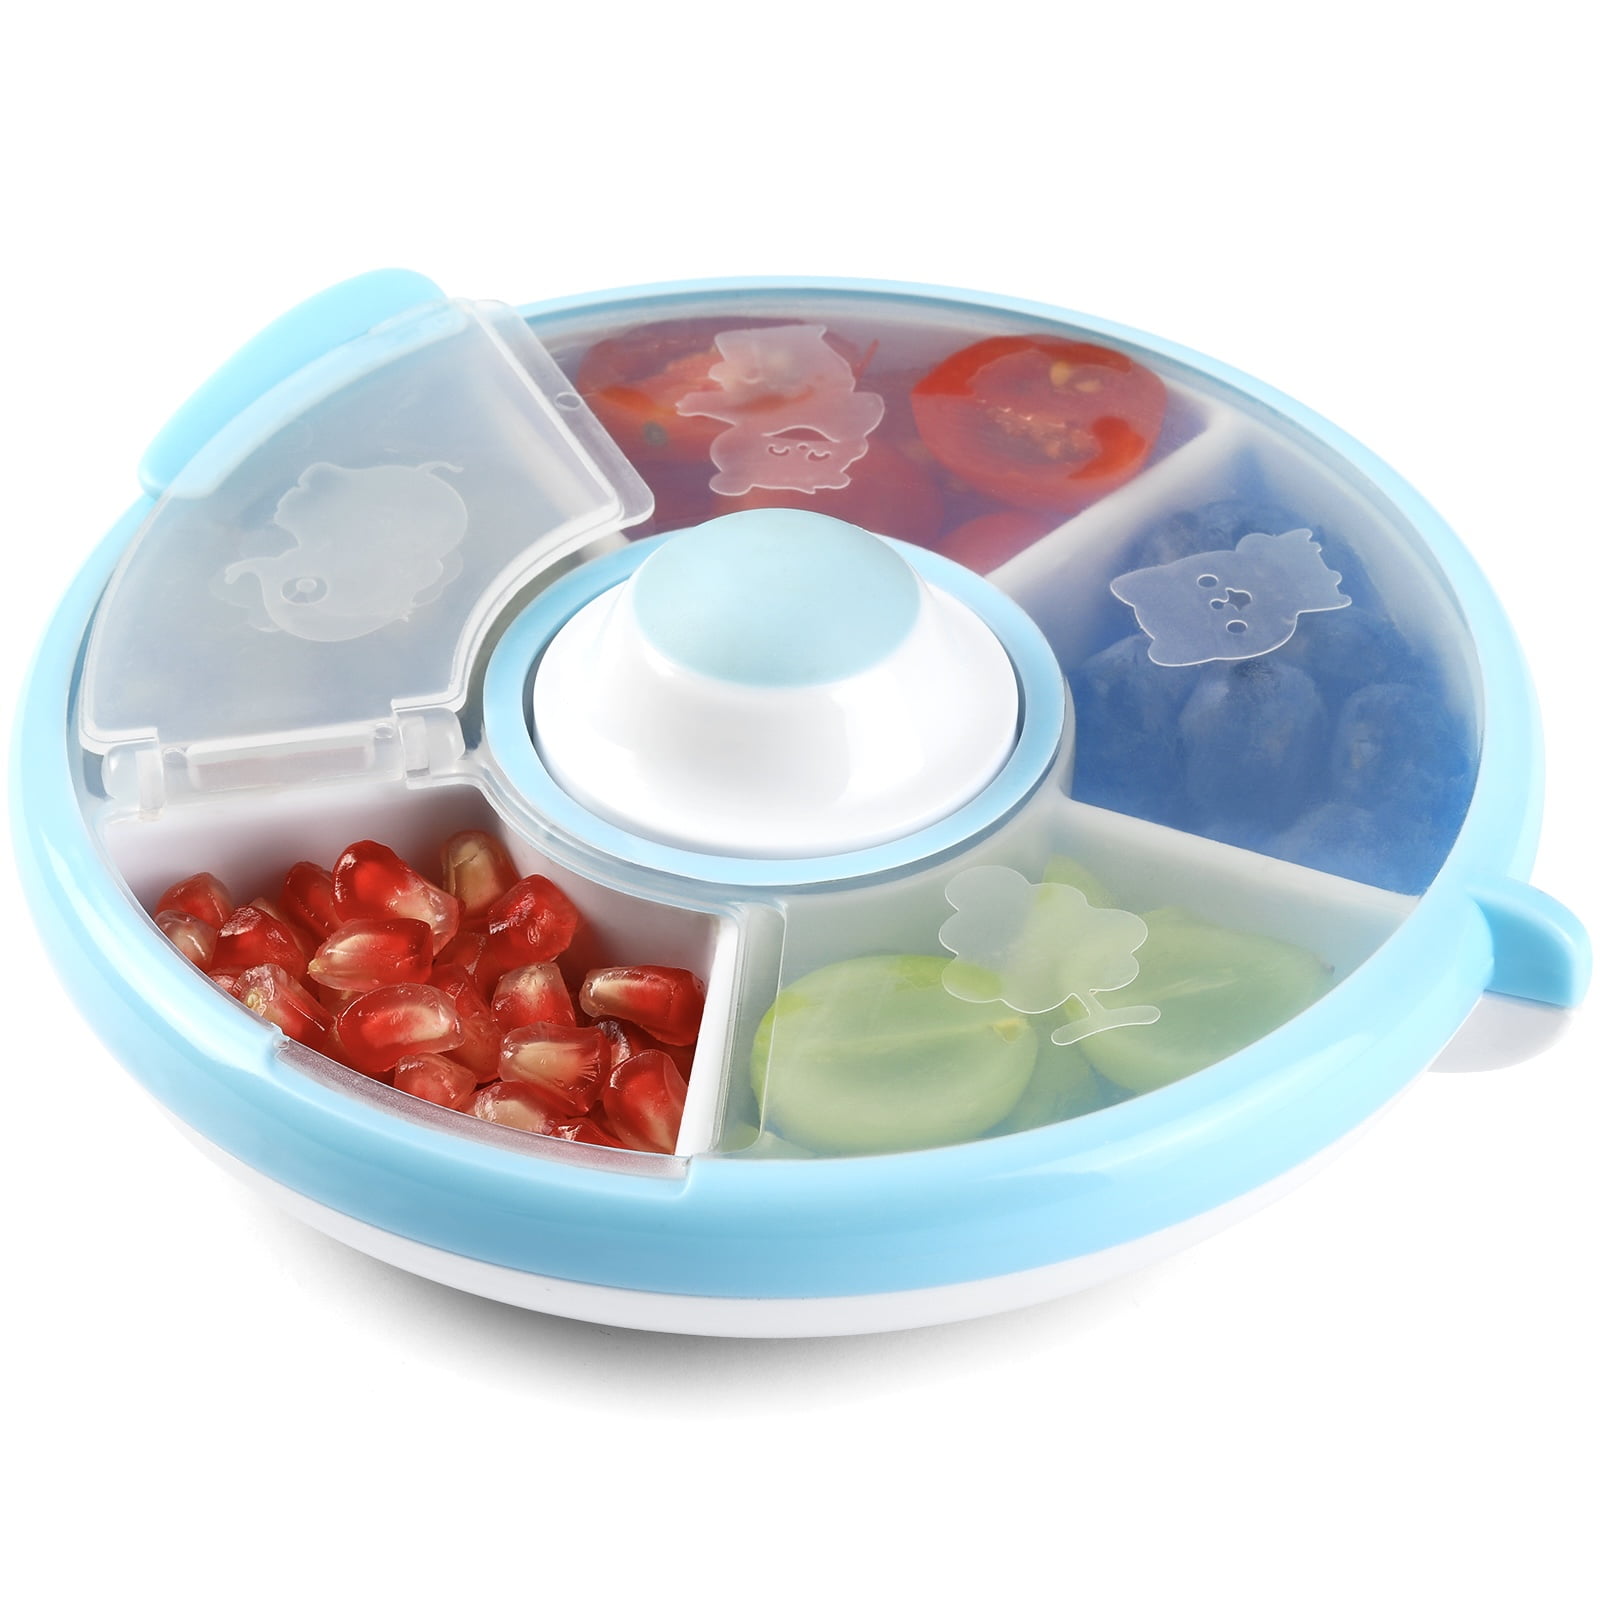 MUST HAVE snack container  Gobe Snack Spinner 